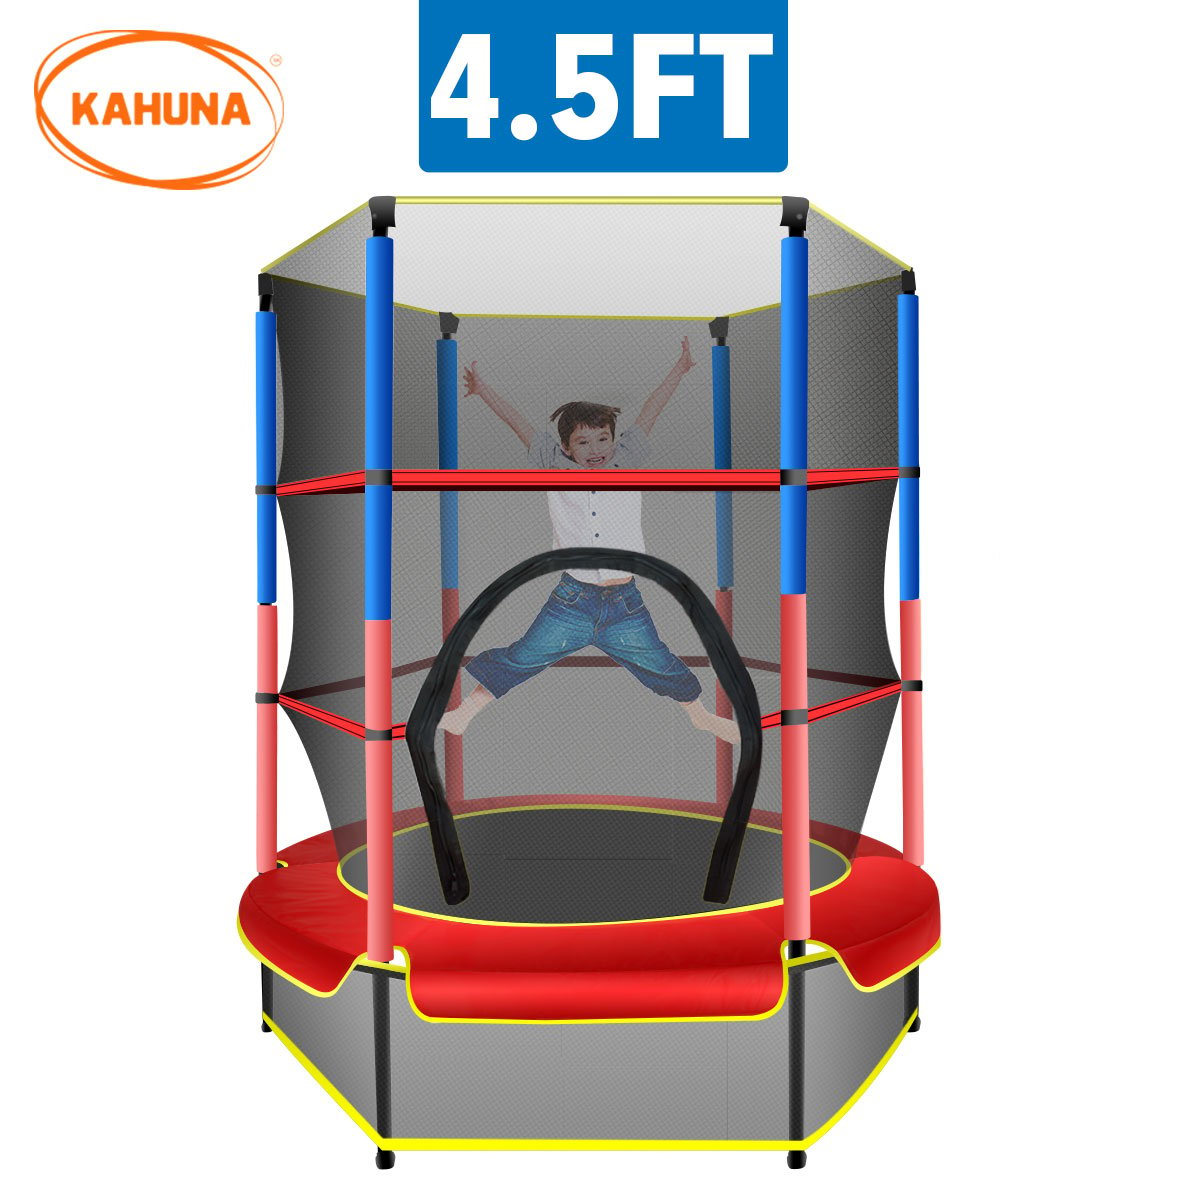 Kahuna 4.5ft Trampoline Round Free Safety Net Spring Pad Cover Mat Outdoor Red